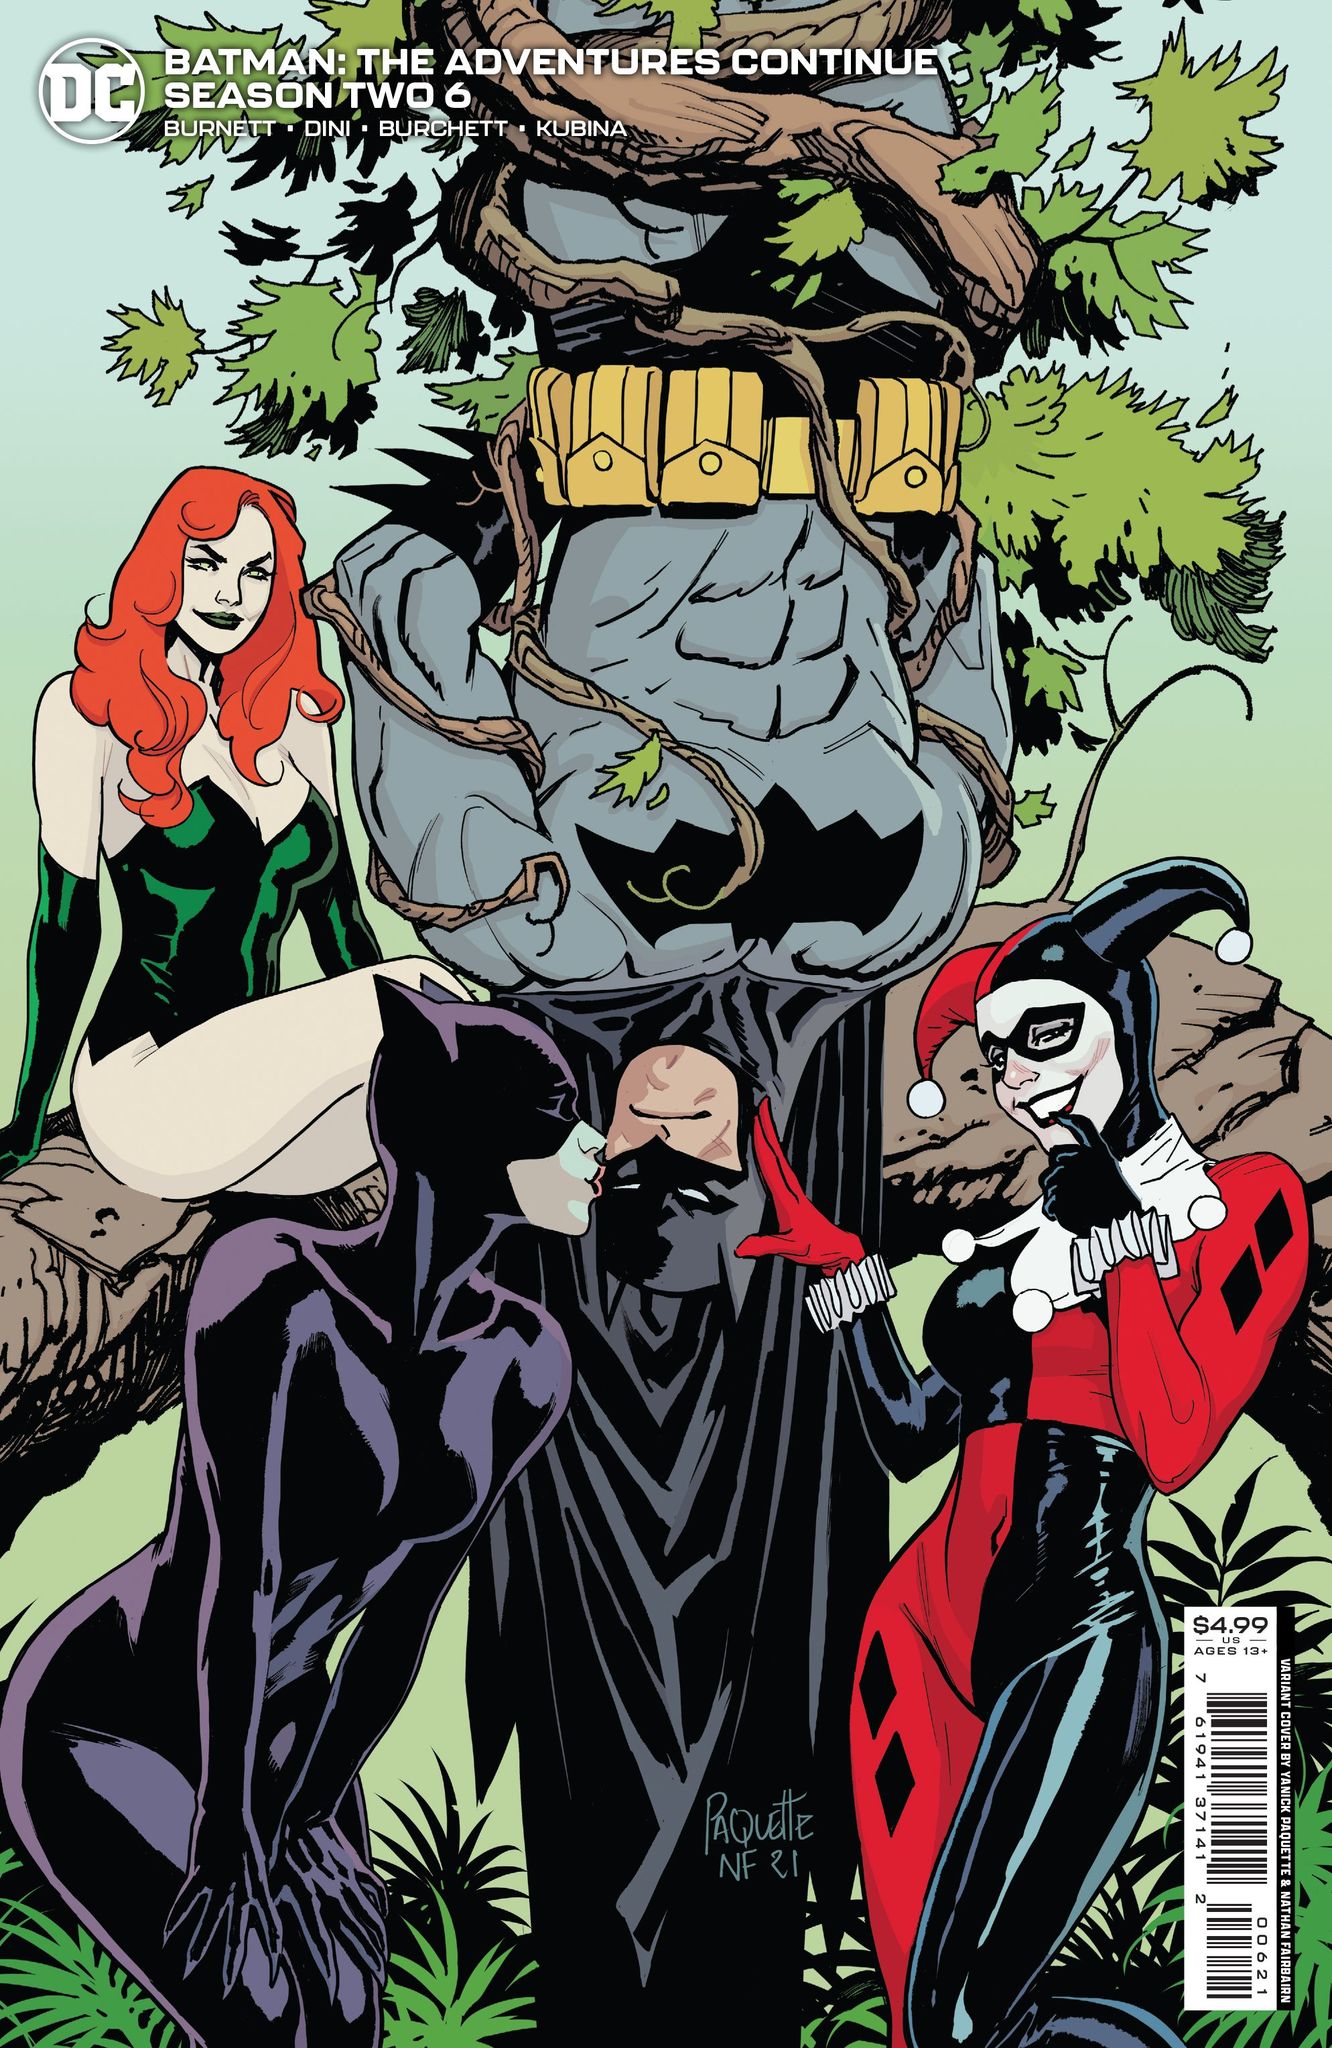 Batman The Adventures Continue Season II #6 Cover B Yanick Paquette Card Stock Variant (Of 7)